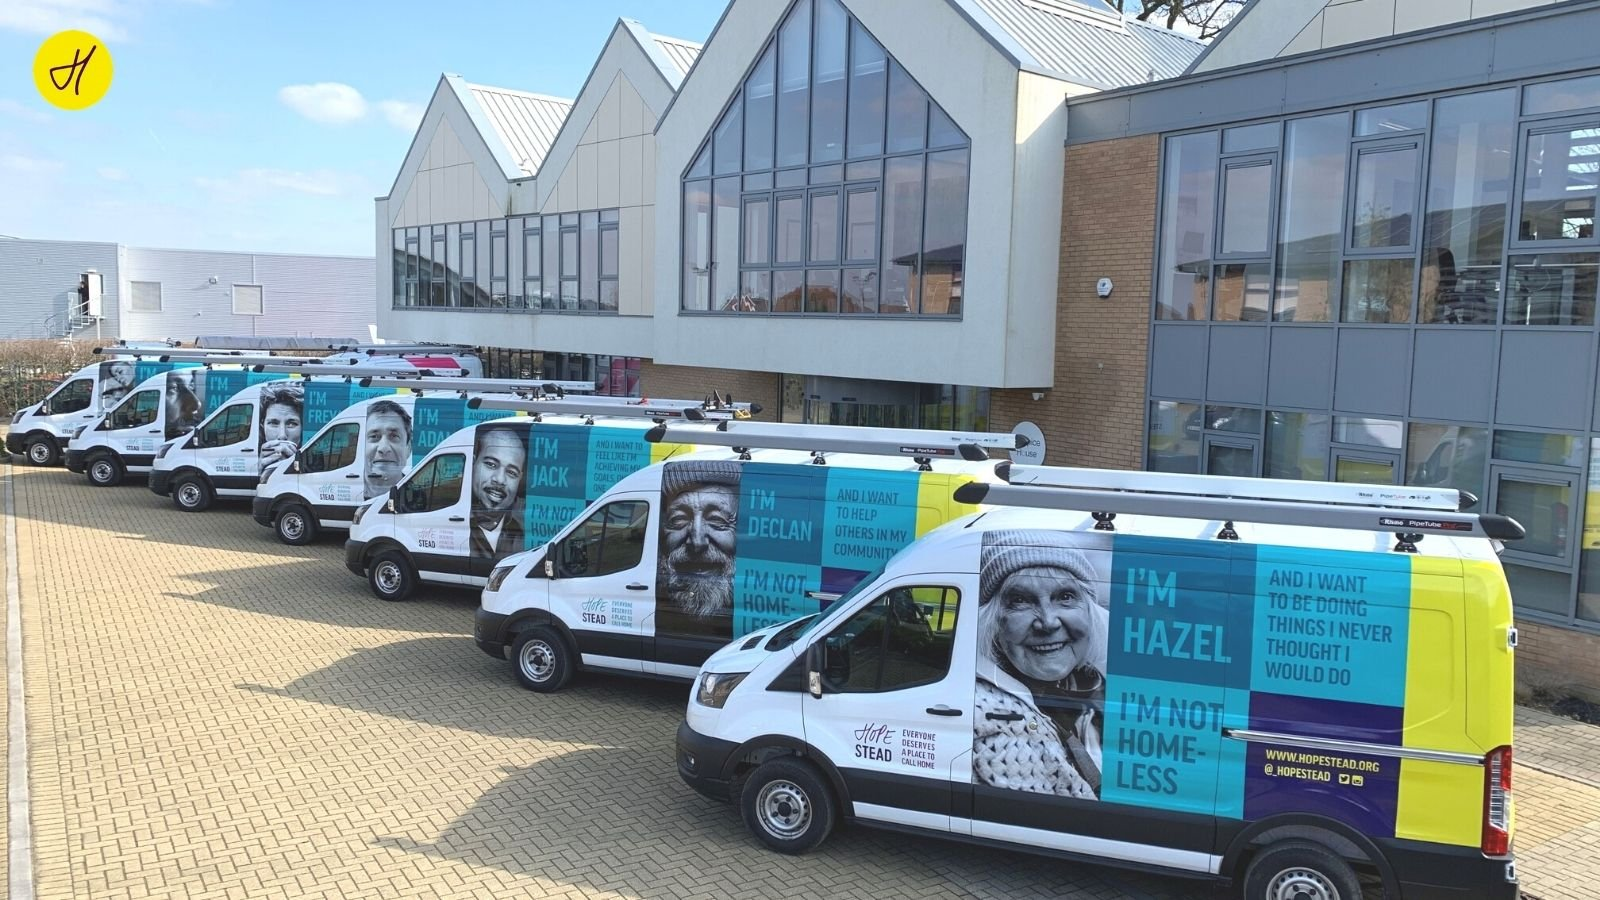 Image of Hopestead charity vans parked outside building